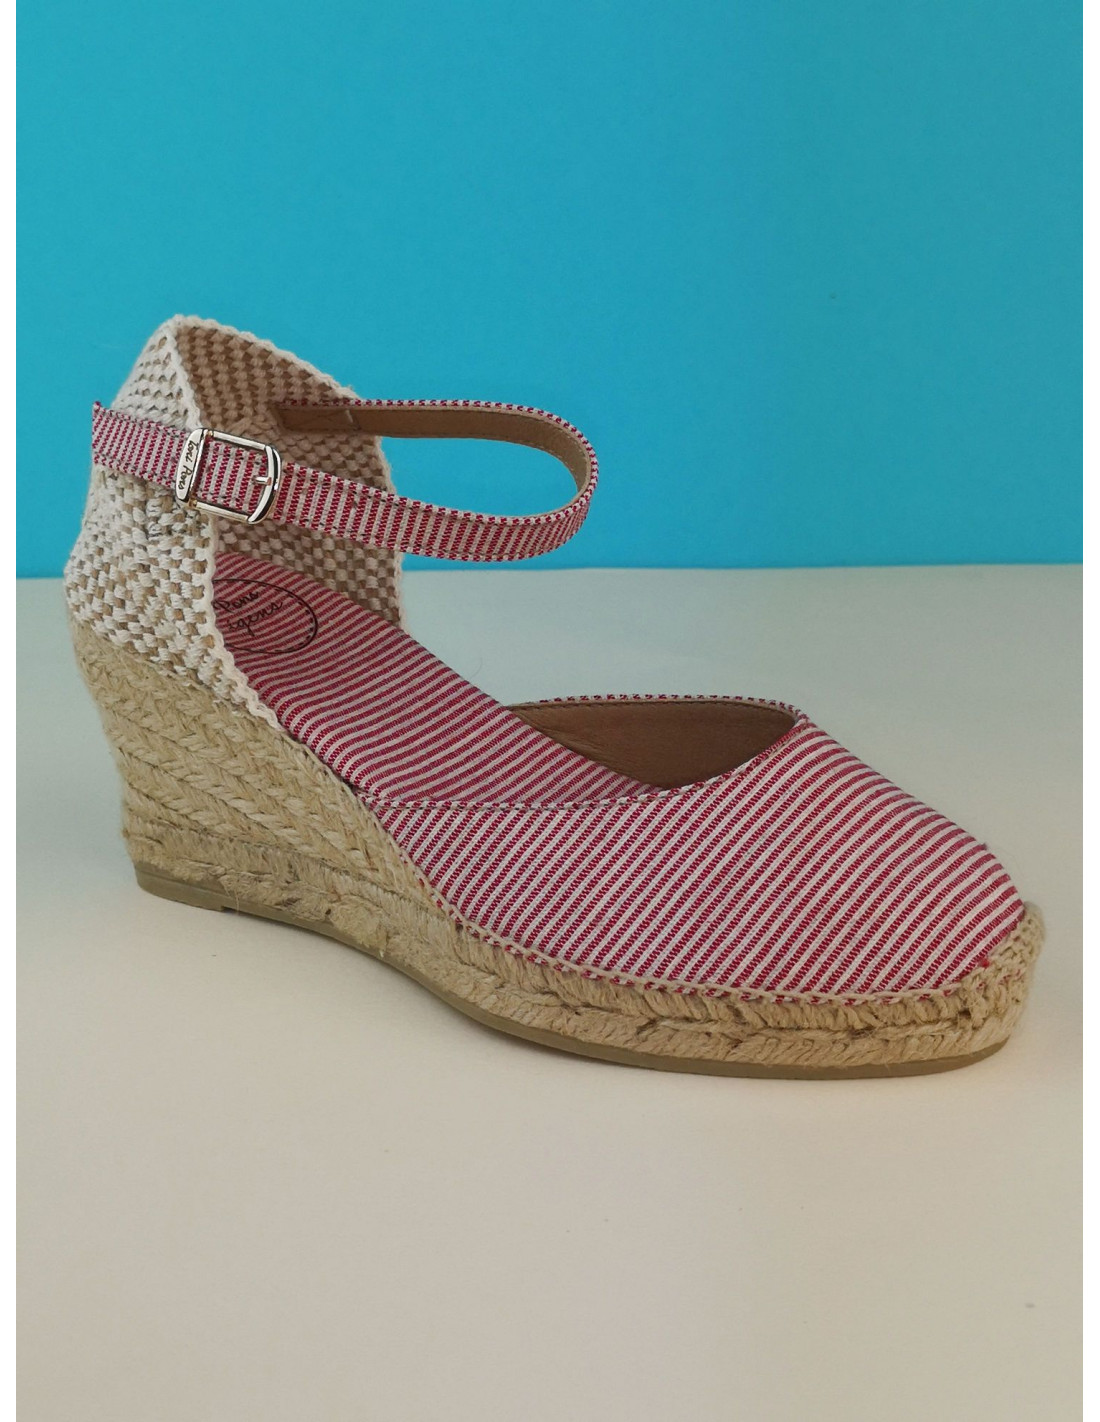 Wedge sandals, with red rarity, Corfu-5MT, Toni Pons